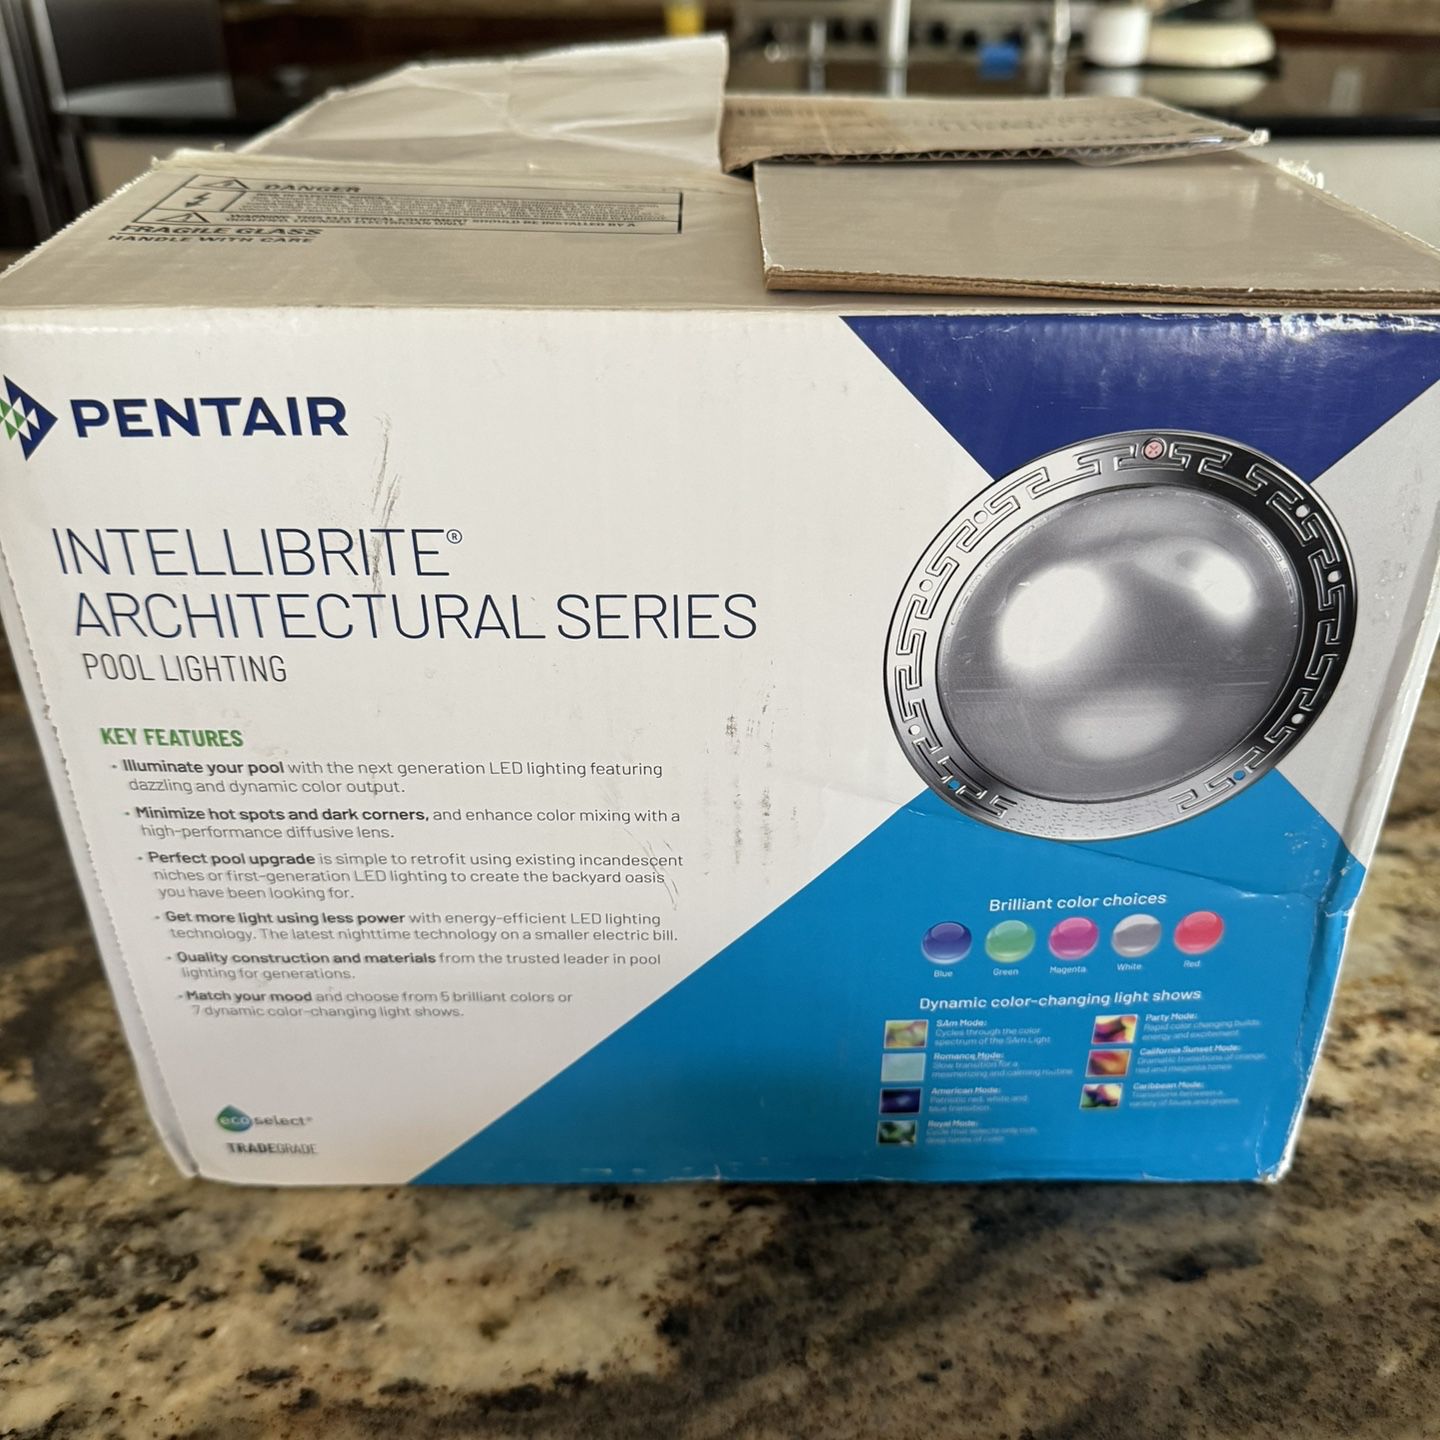 Pentair Intellibrite Color Changing Pool Light Architectural Series